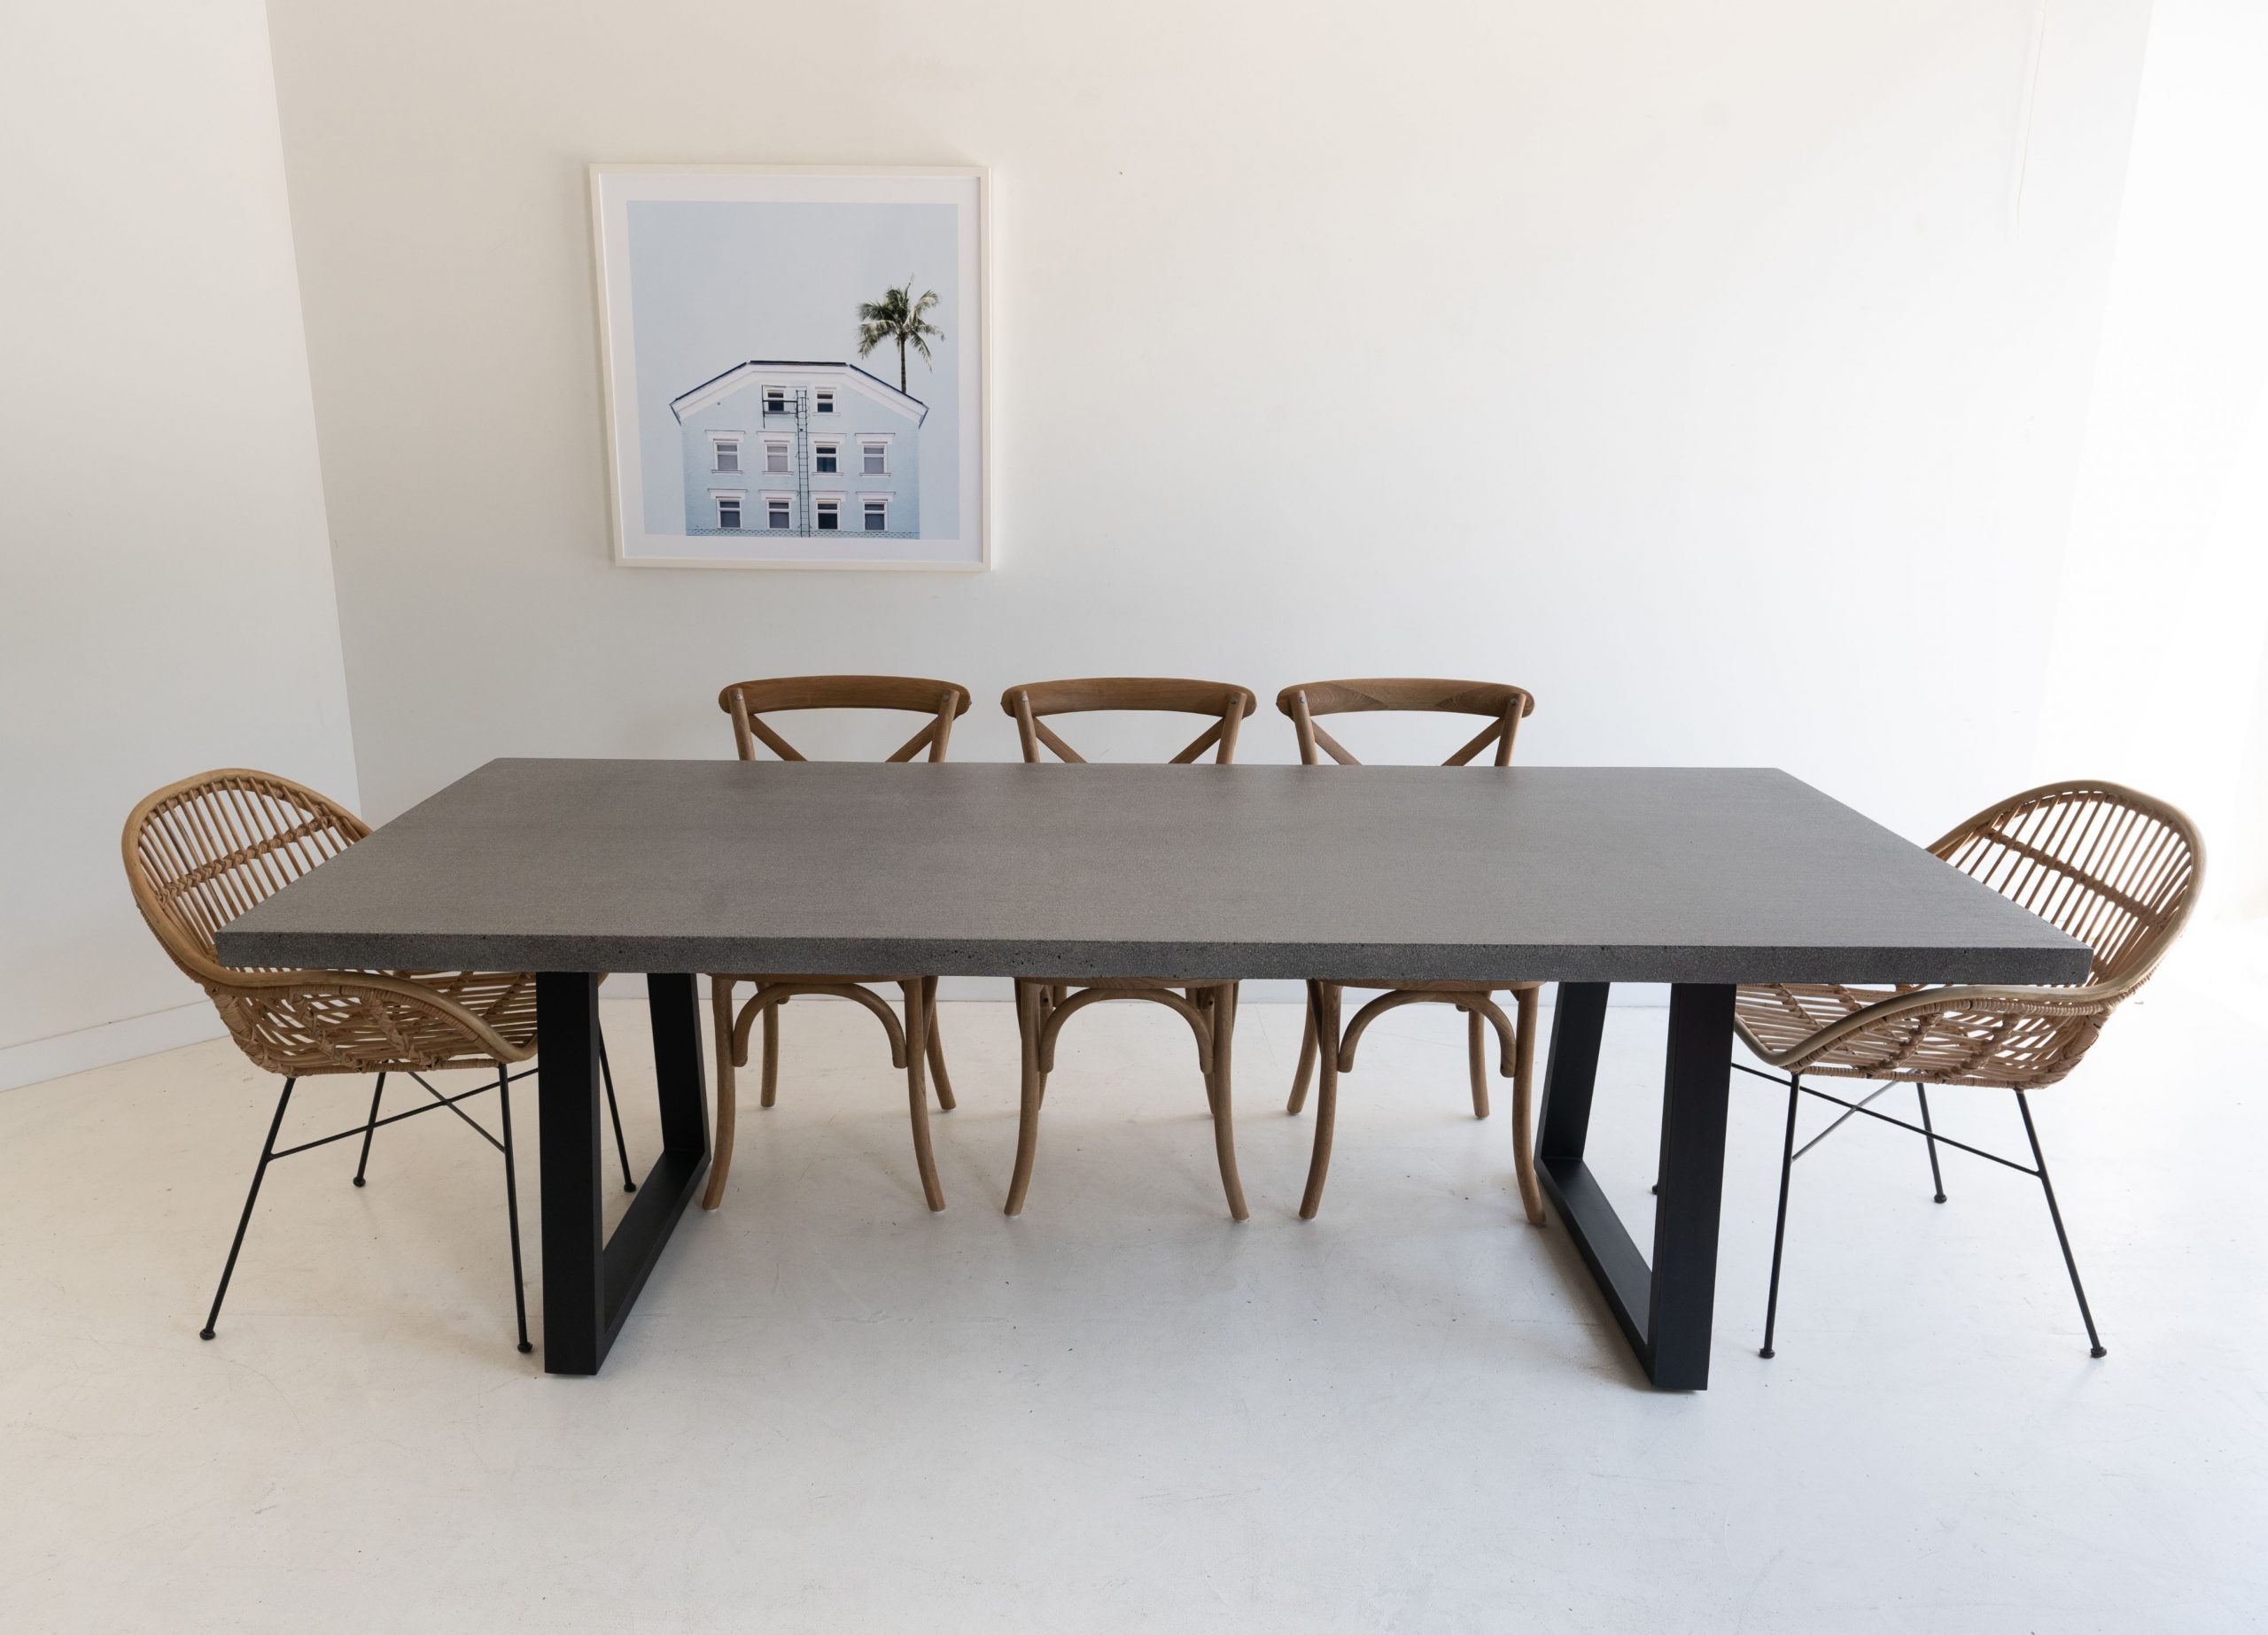 2.4m Sierra Elkstone Rectangular Dining Table - Speckled Grey with Black Powder Coated Legs